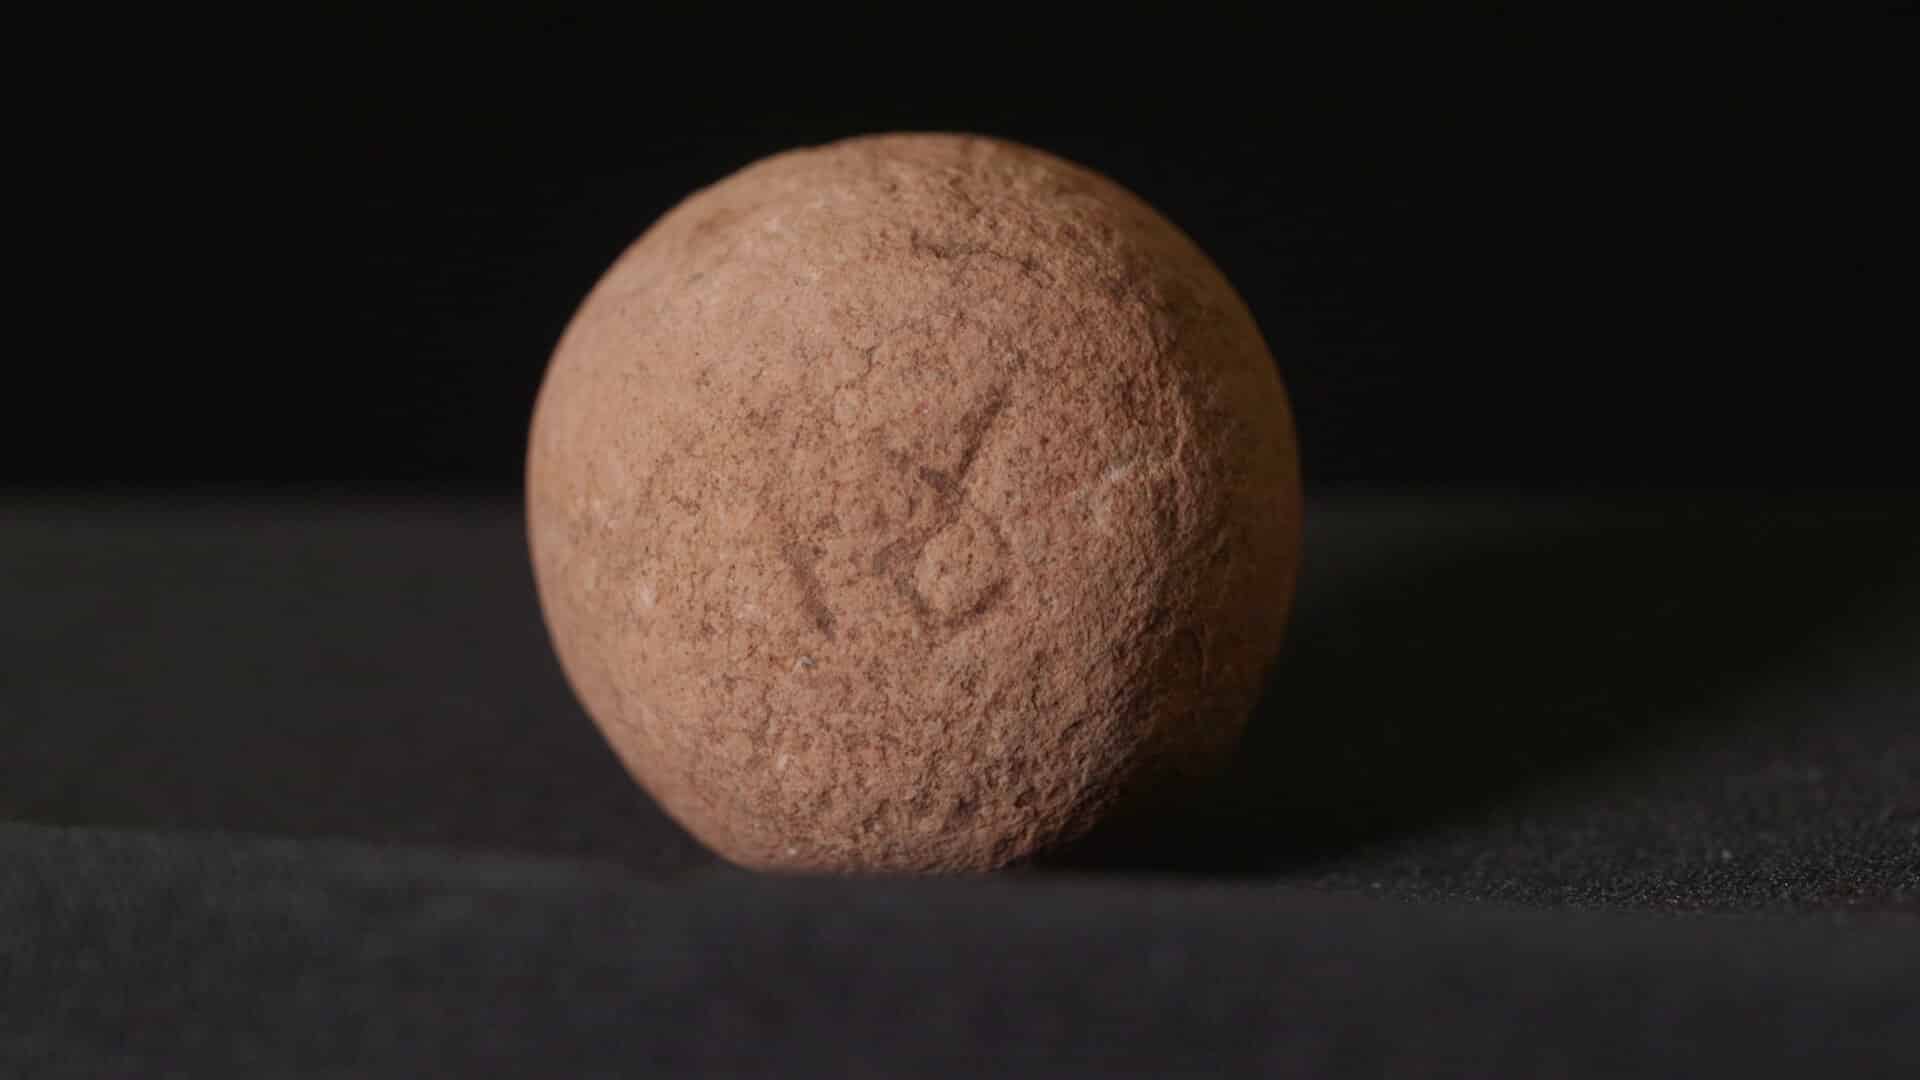 A shekel weight from the days of the First Temple discovered in excavations in the Judean Mountains. Photo by Emil Eldjem, Antiquities Authority